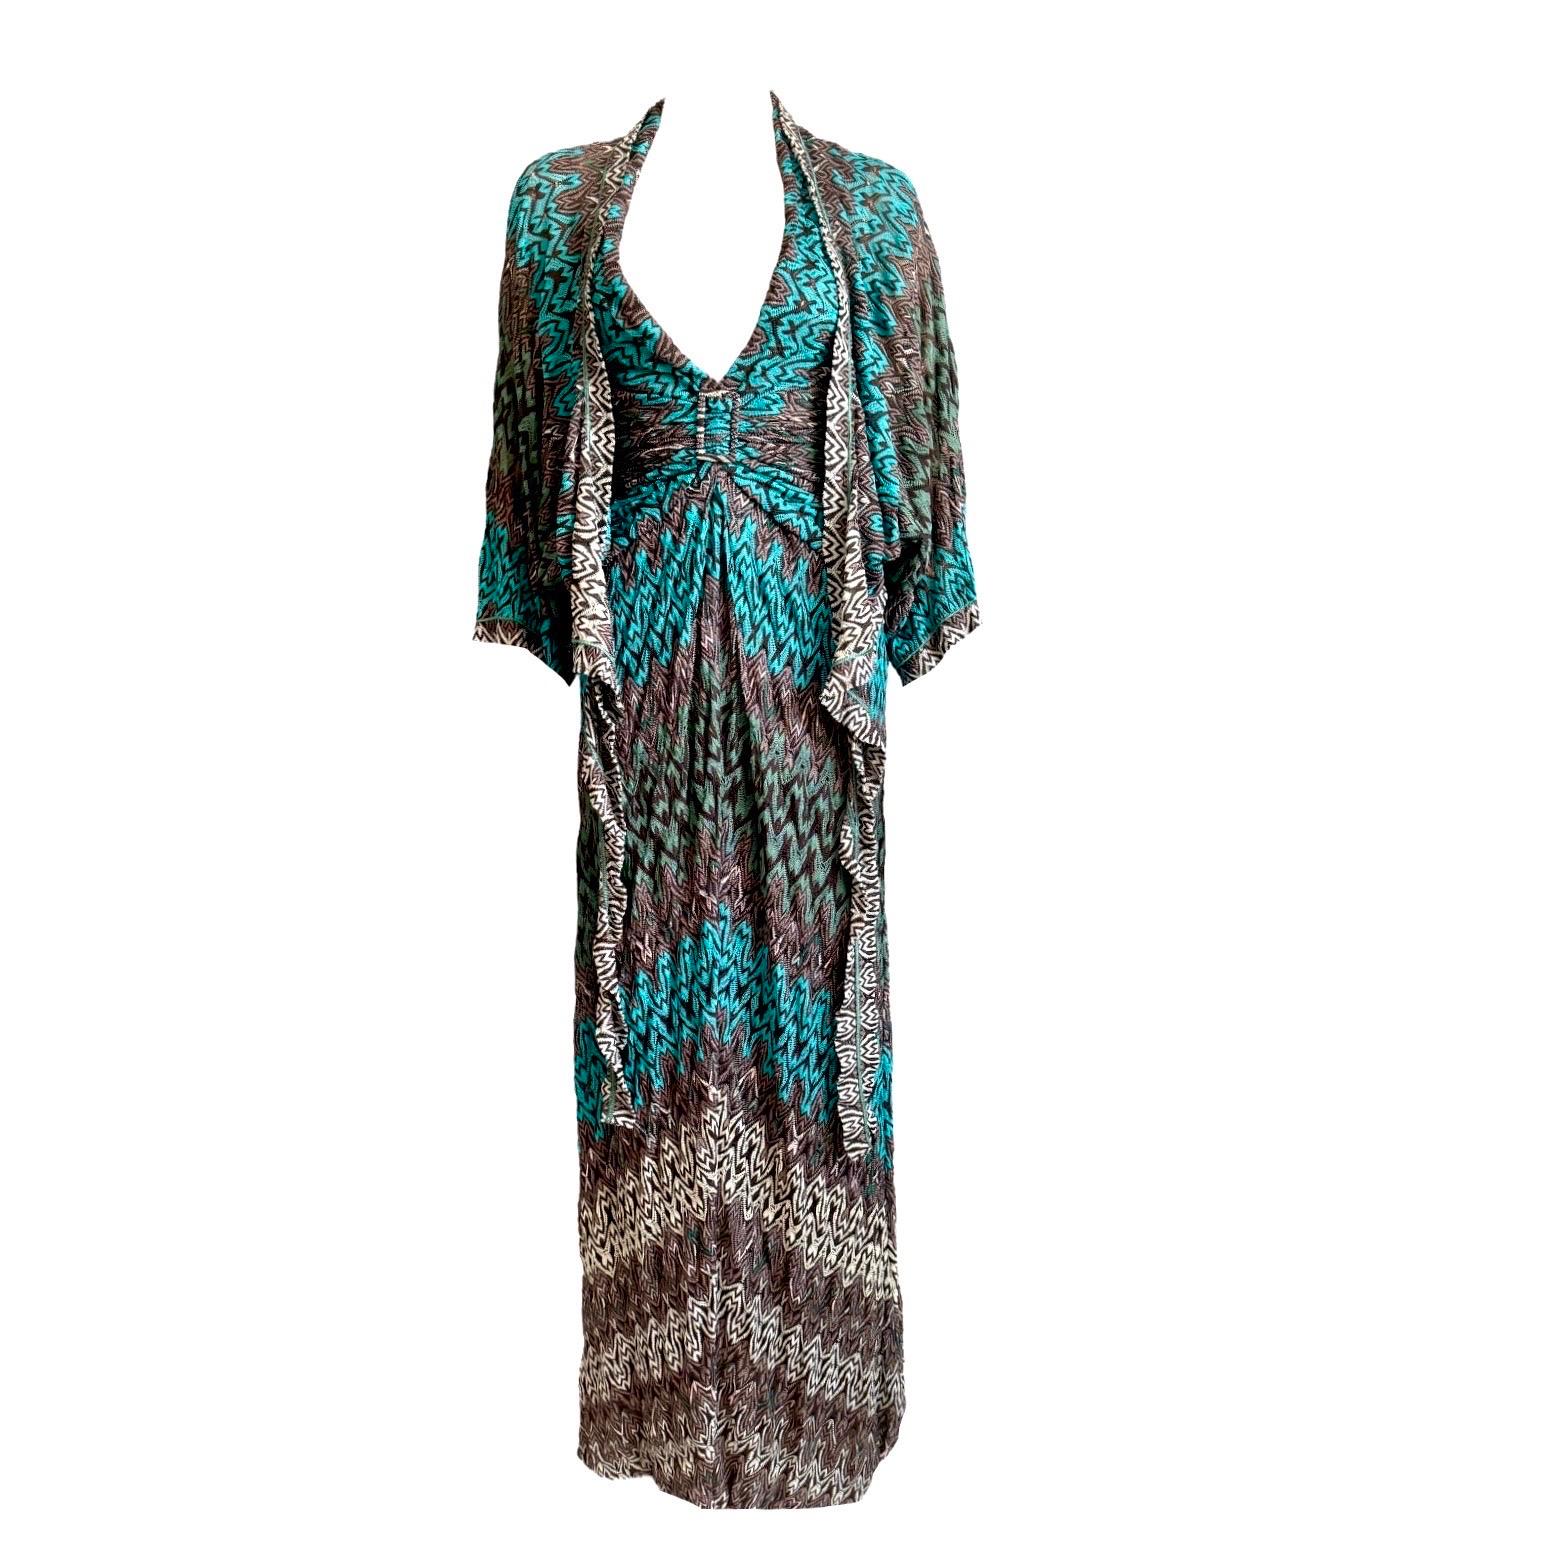 NEW Missoni 2PC Dramatic Deep Neck Crochet Knit Evening Dress Gown & Cardigan 40 For Sale 3